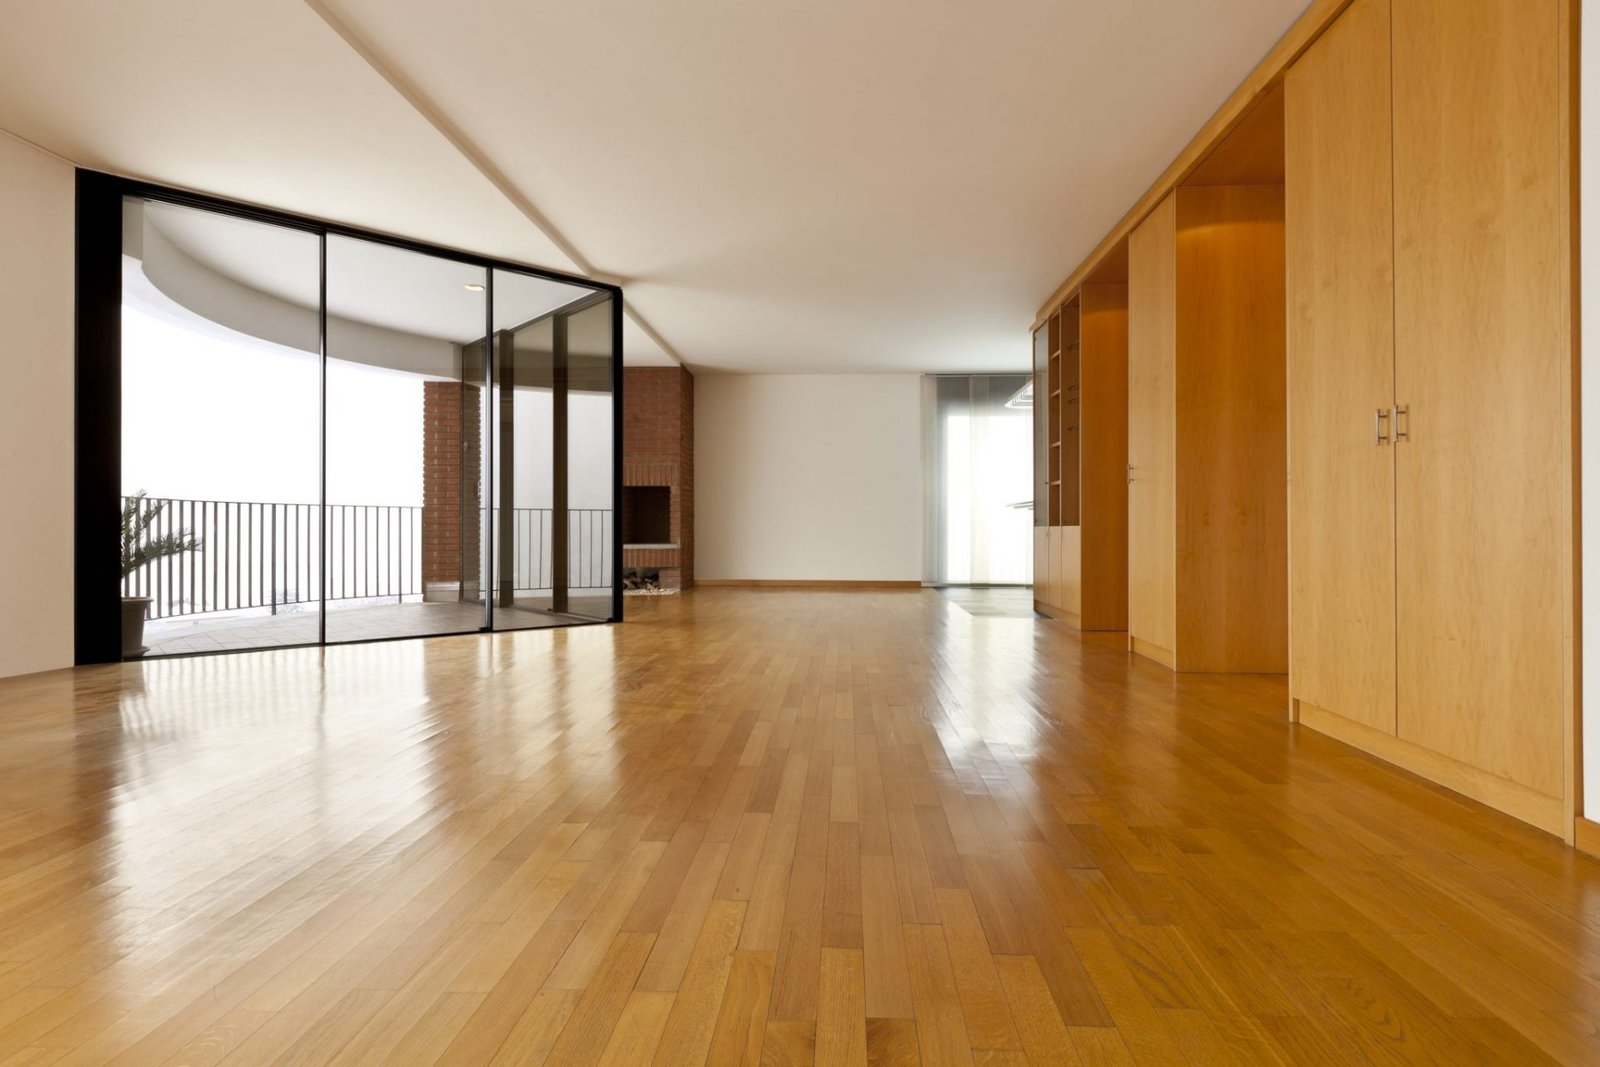 Flooring Your Home? Why Consider Local Timber Flooring Suppliers